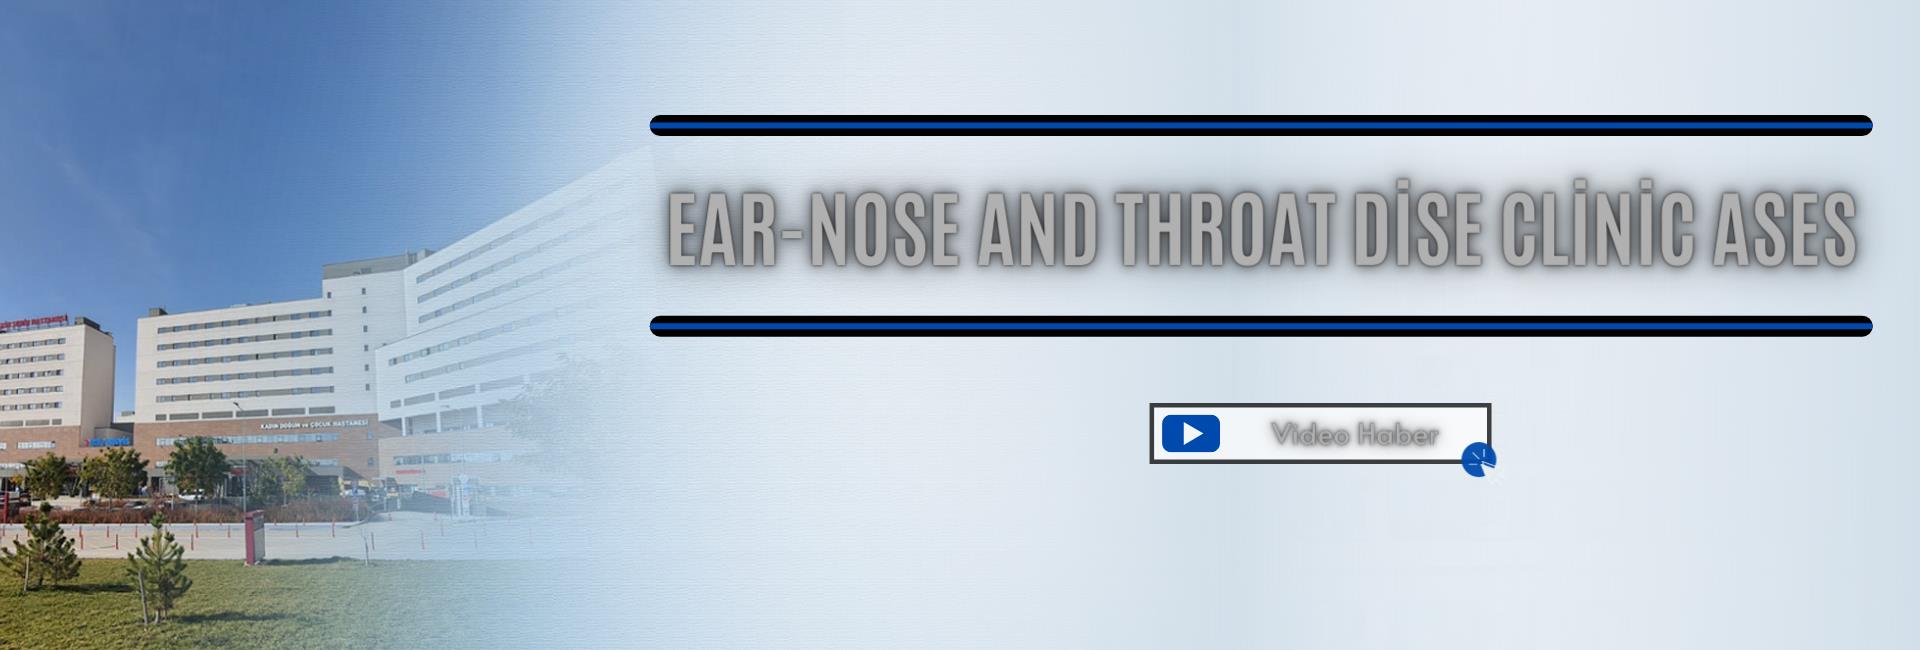 Ear-Nose and Throat Clinic